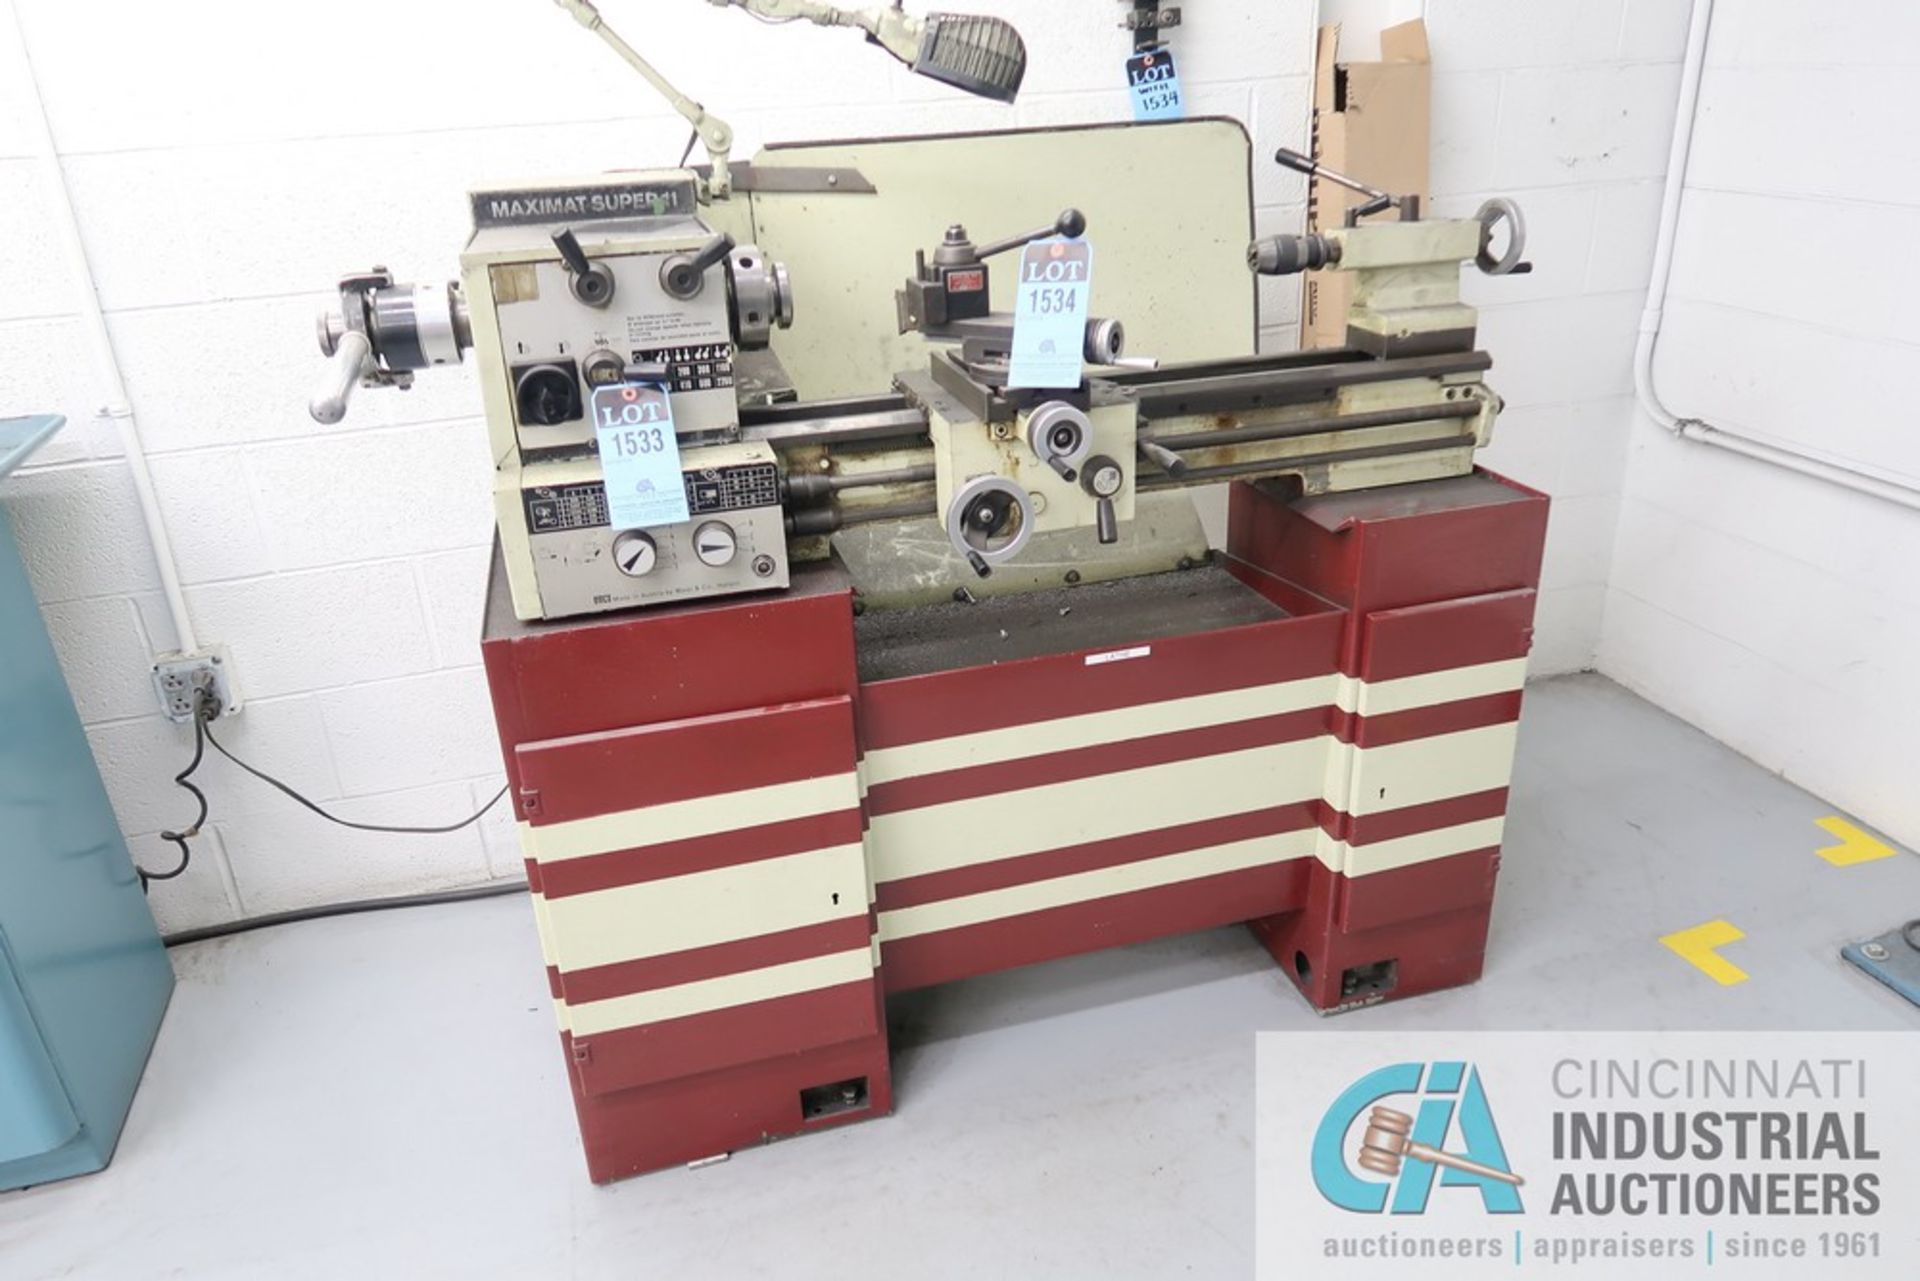 11" X 26" EMCO MAXIMAT SUPER 11 GEARED HEAD ENGINE LATHE; S/N N/A, WITH 5C COLLET CHUCK, LEVER